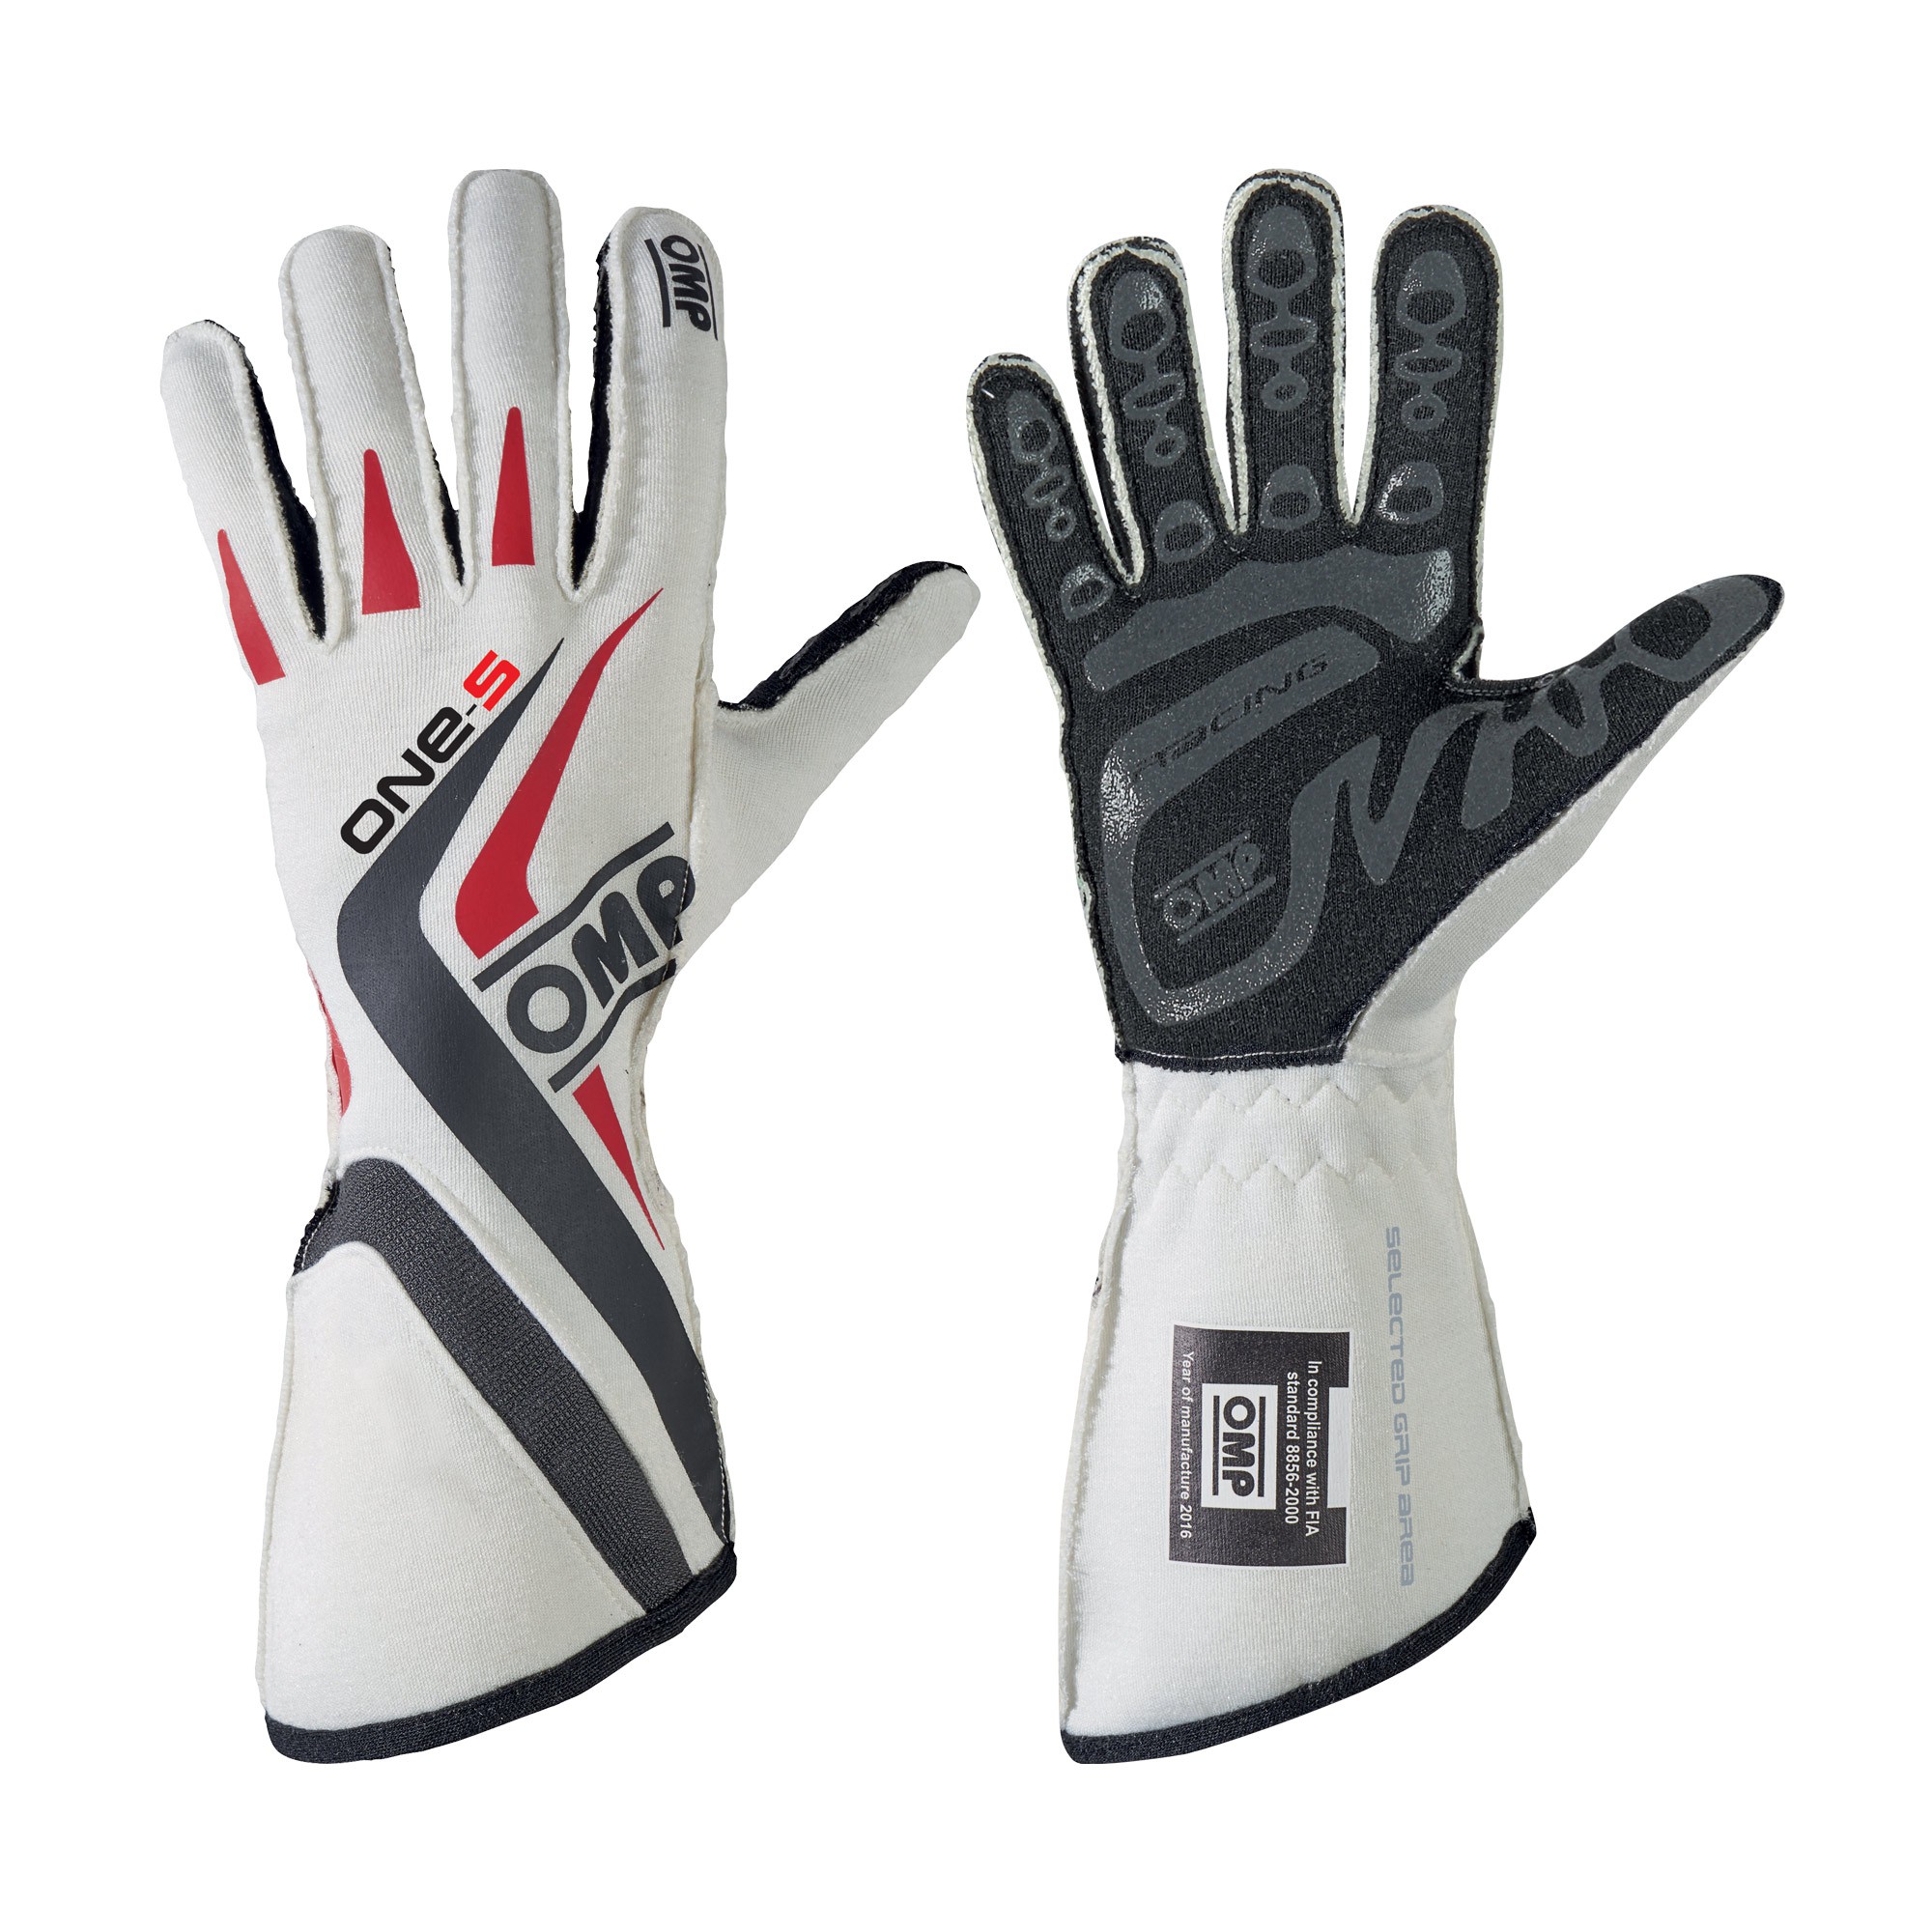 ONE-S GLOVES - Racing gloves | OMP Racing